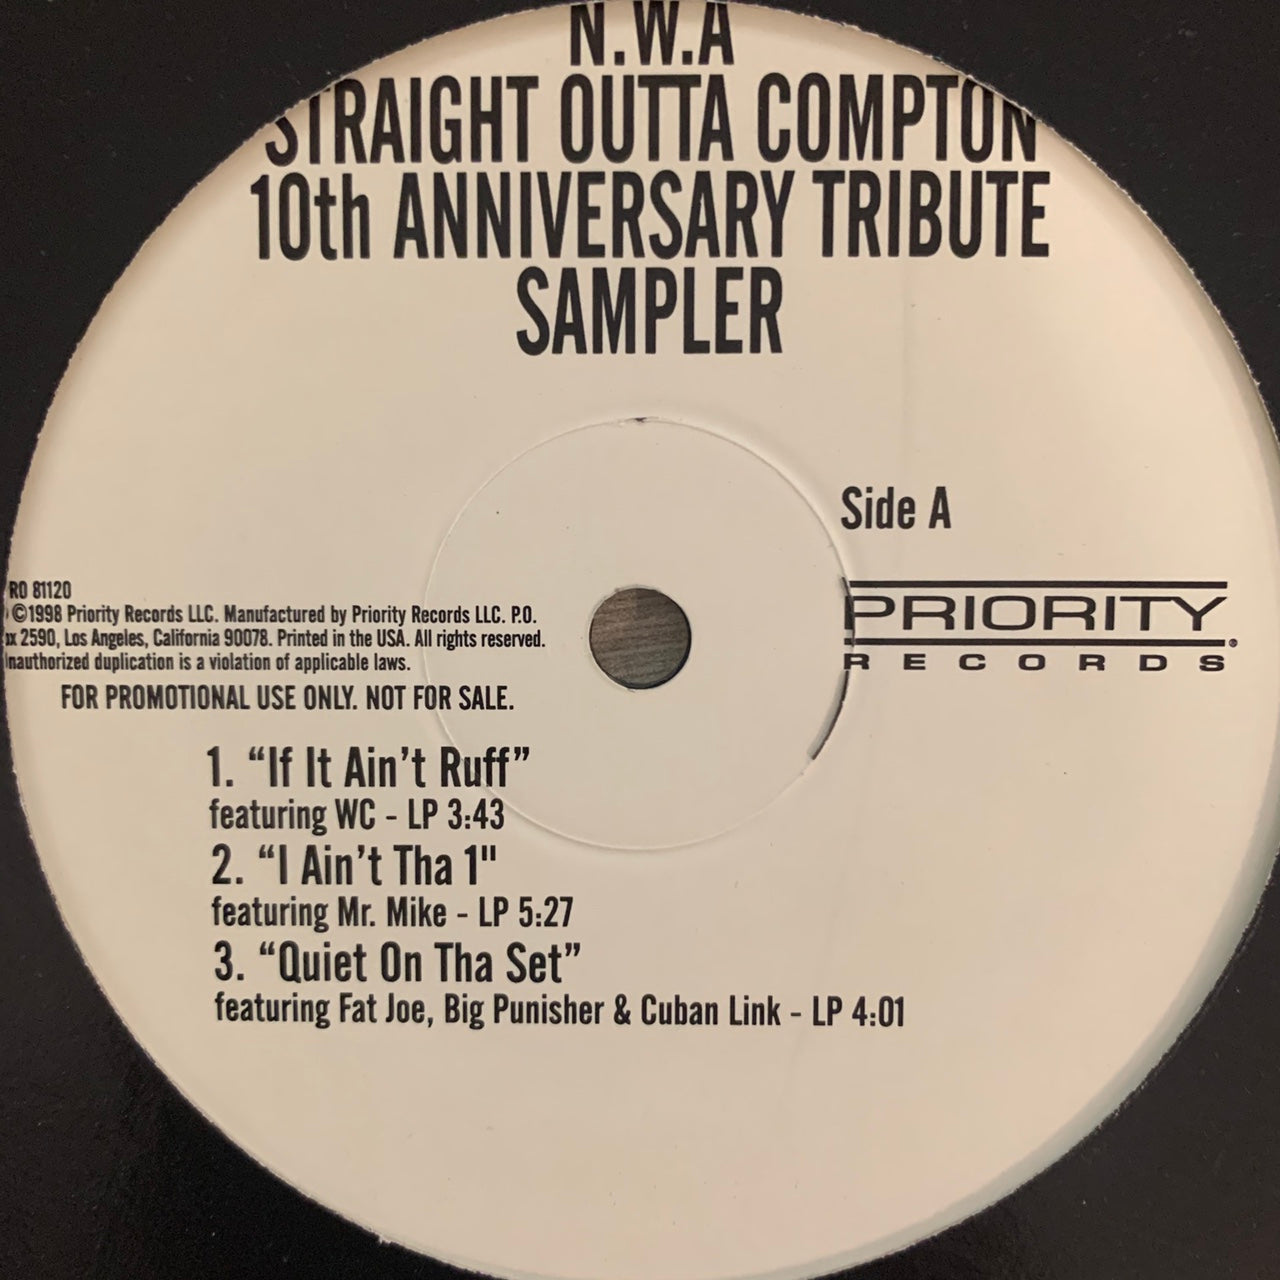 NWA ‘Straight Outta Compton” 10th Anniversary Tribute Album Sampler Feat “If it Ain’t Ruff” , “I Ain’t Tha 1” , “Quiet On The Set” 6 Version 12inch Vinyl